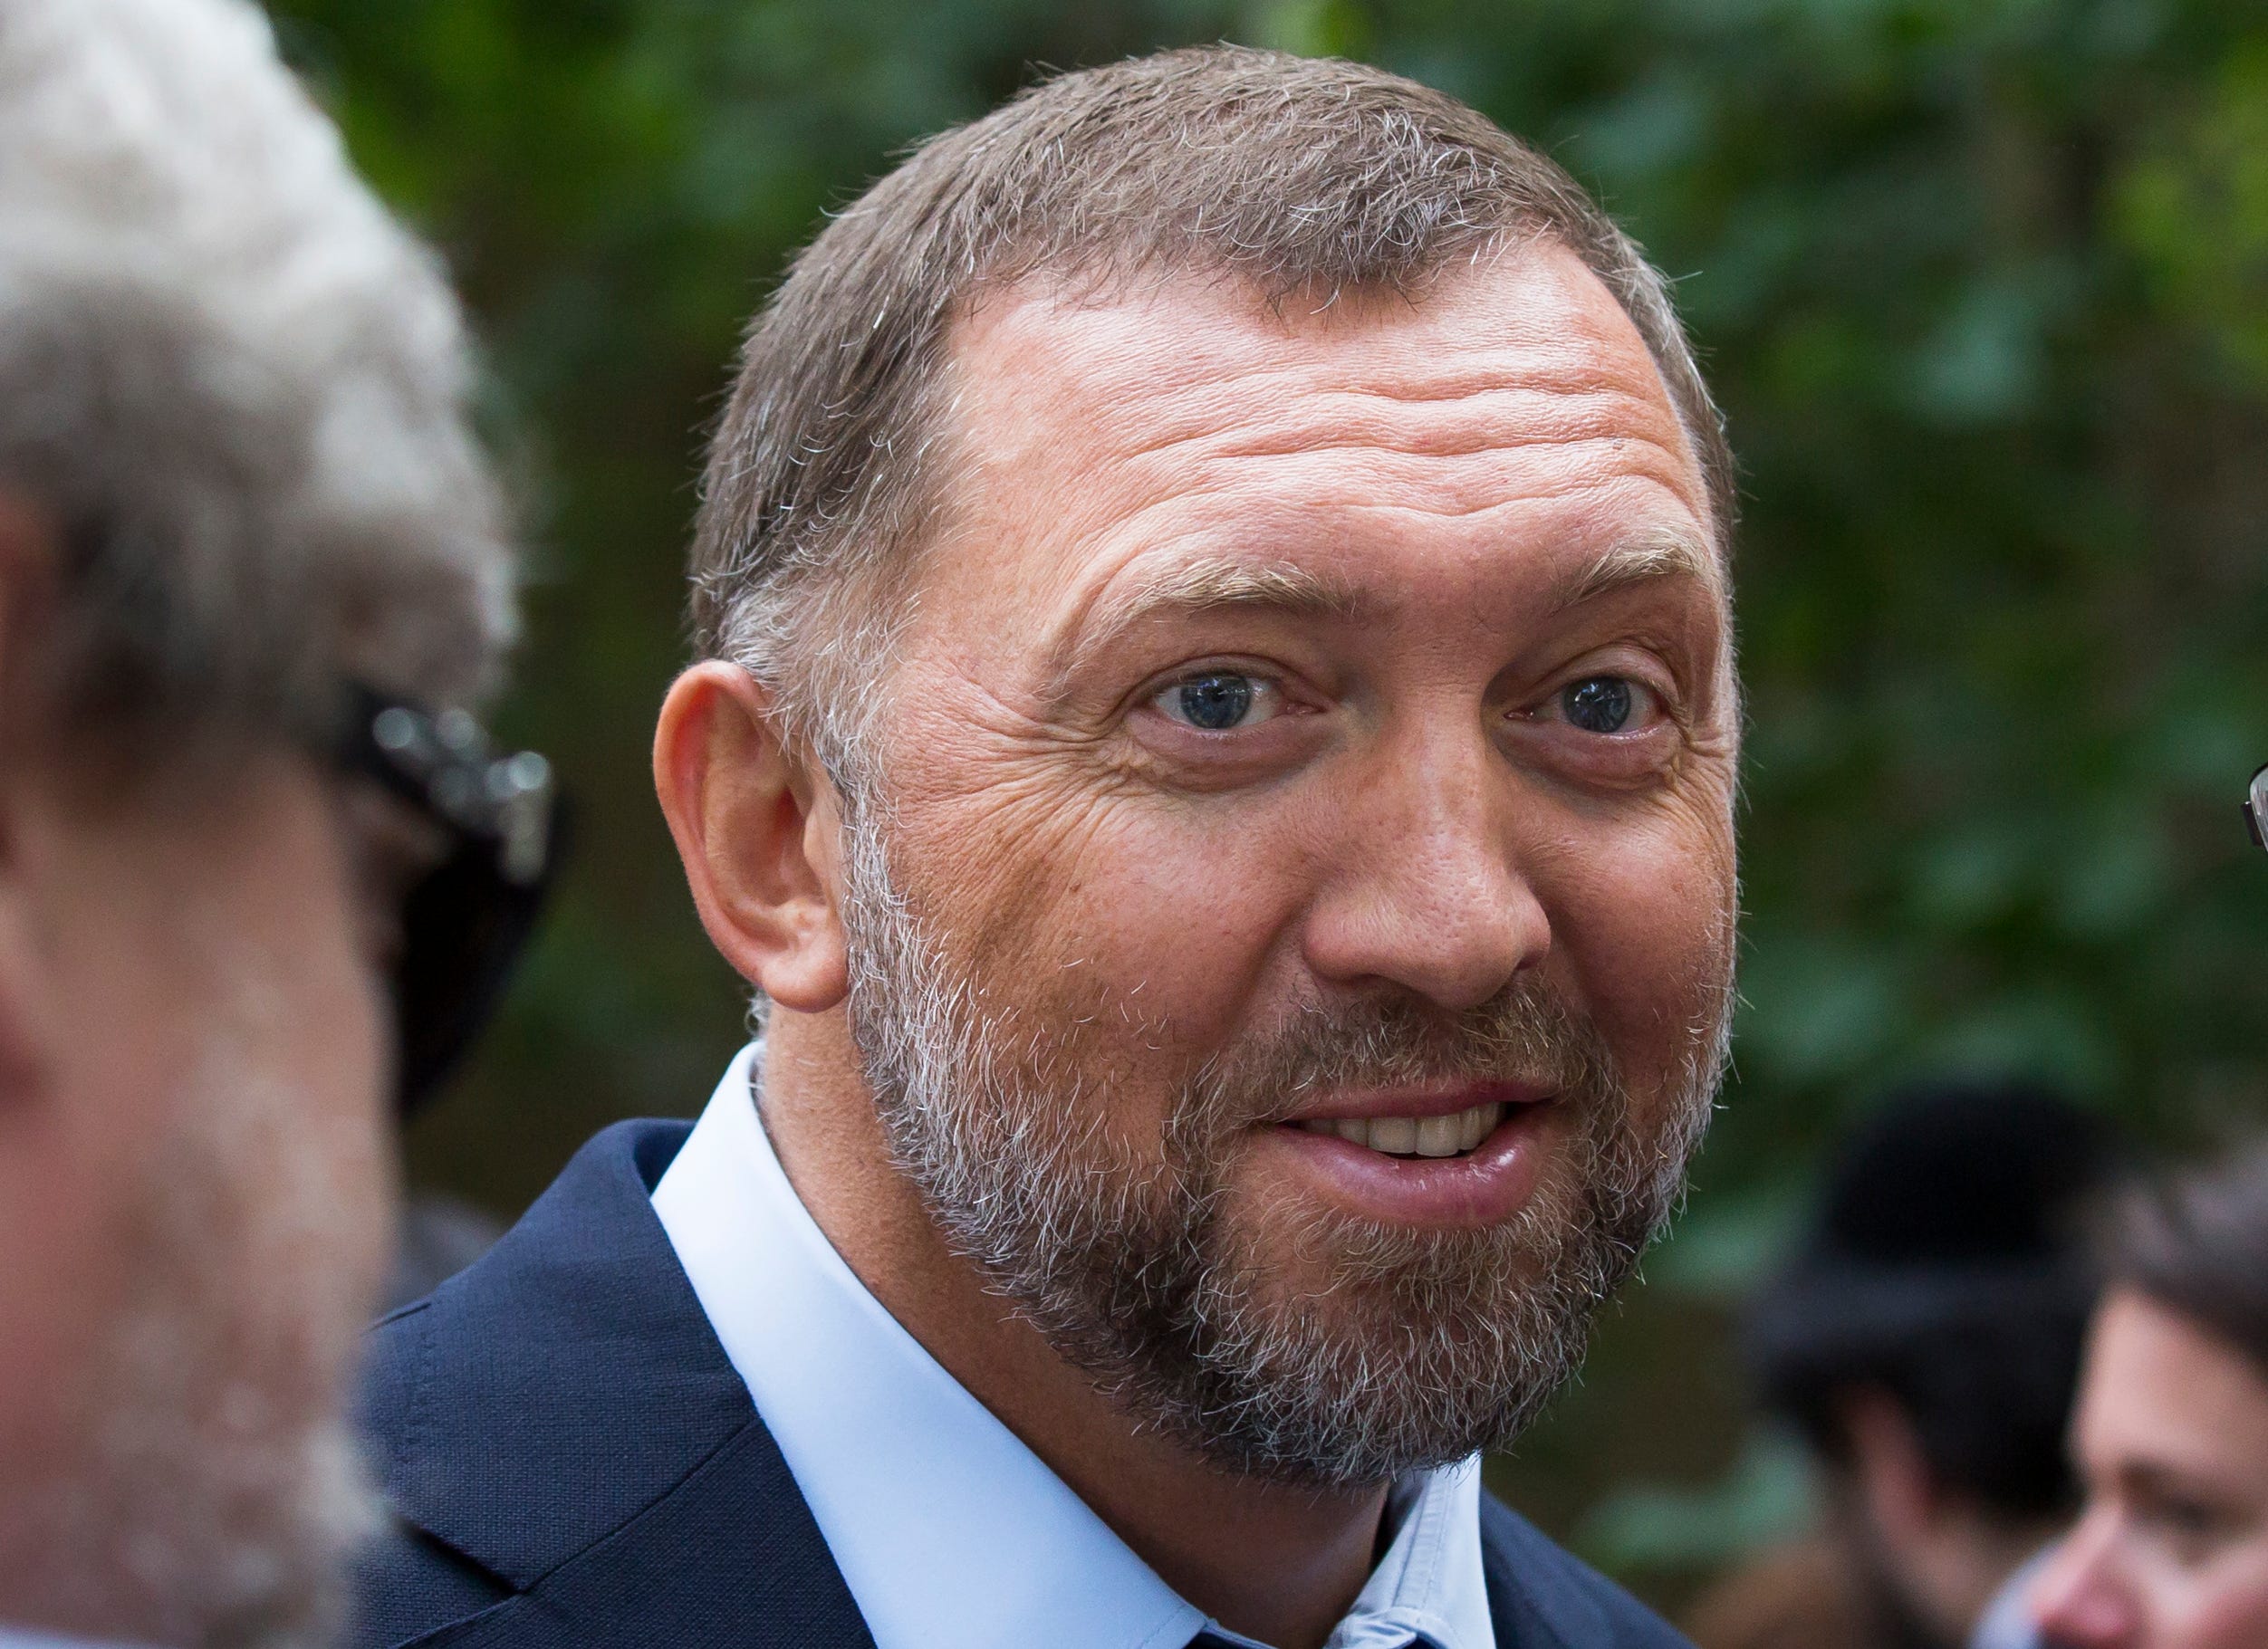 Charles McGonigal, ex-FBI official linked to Russian oligarch Oleg Deripaska, arrested